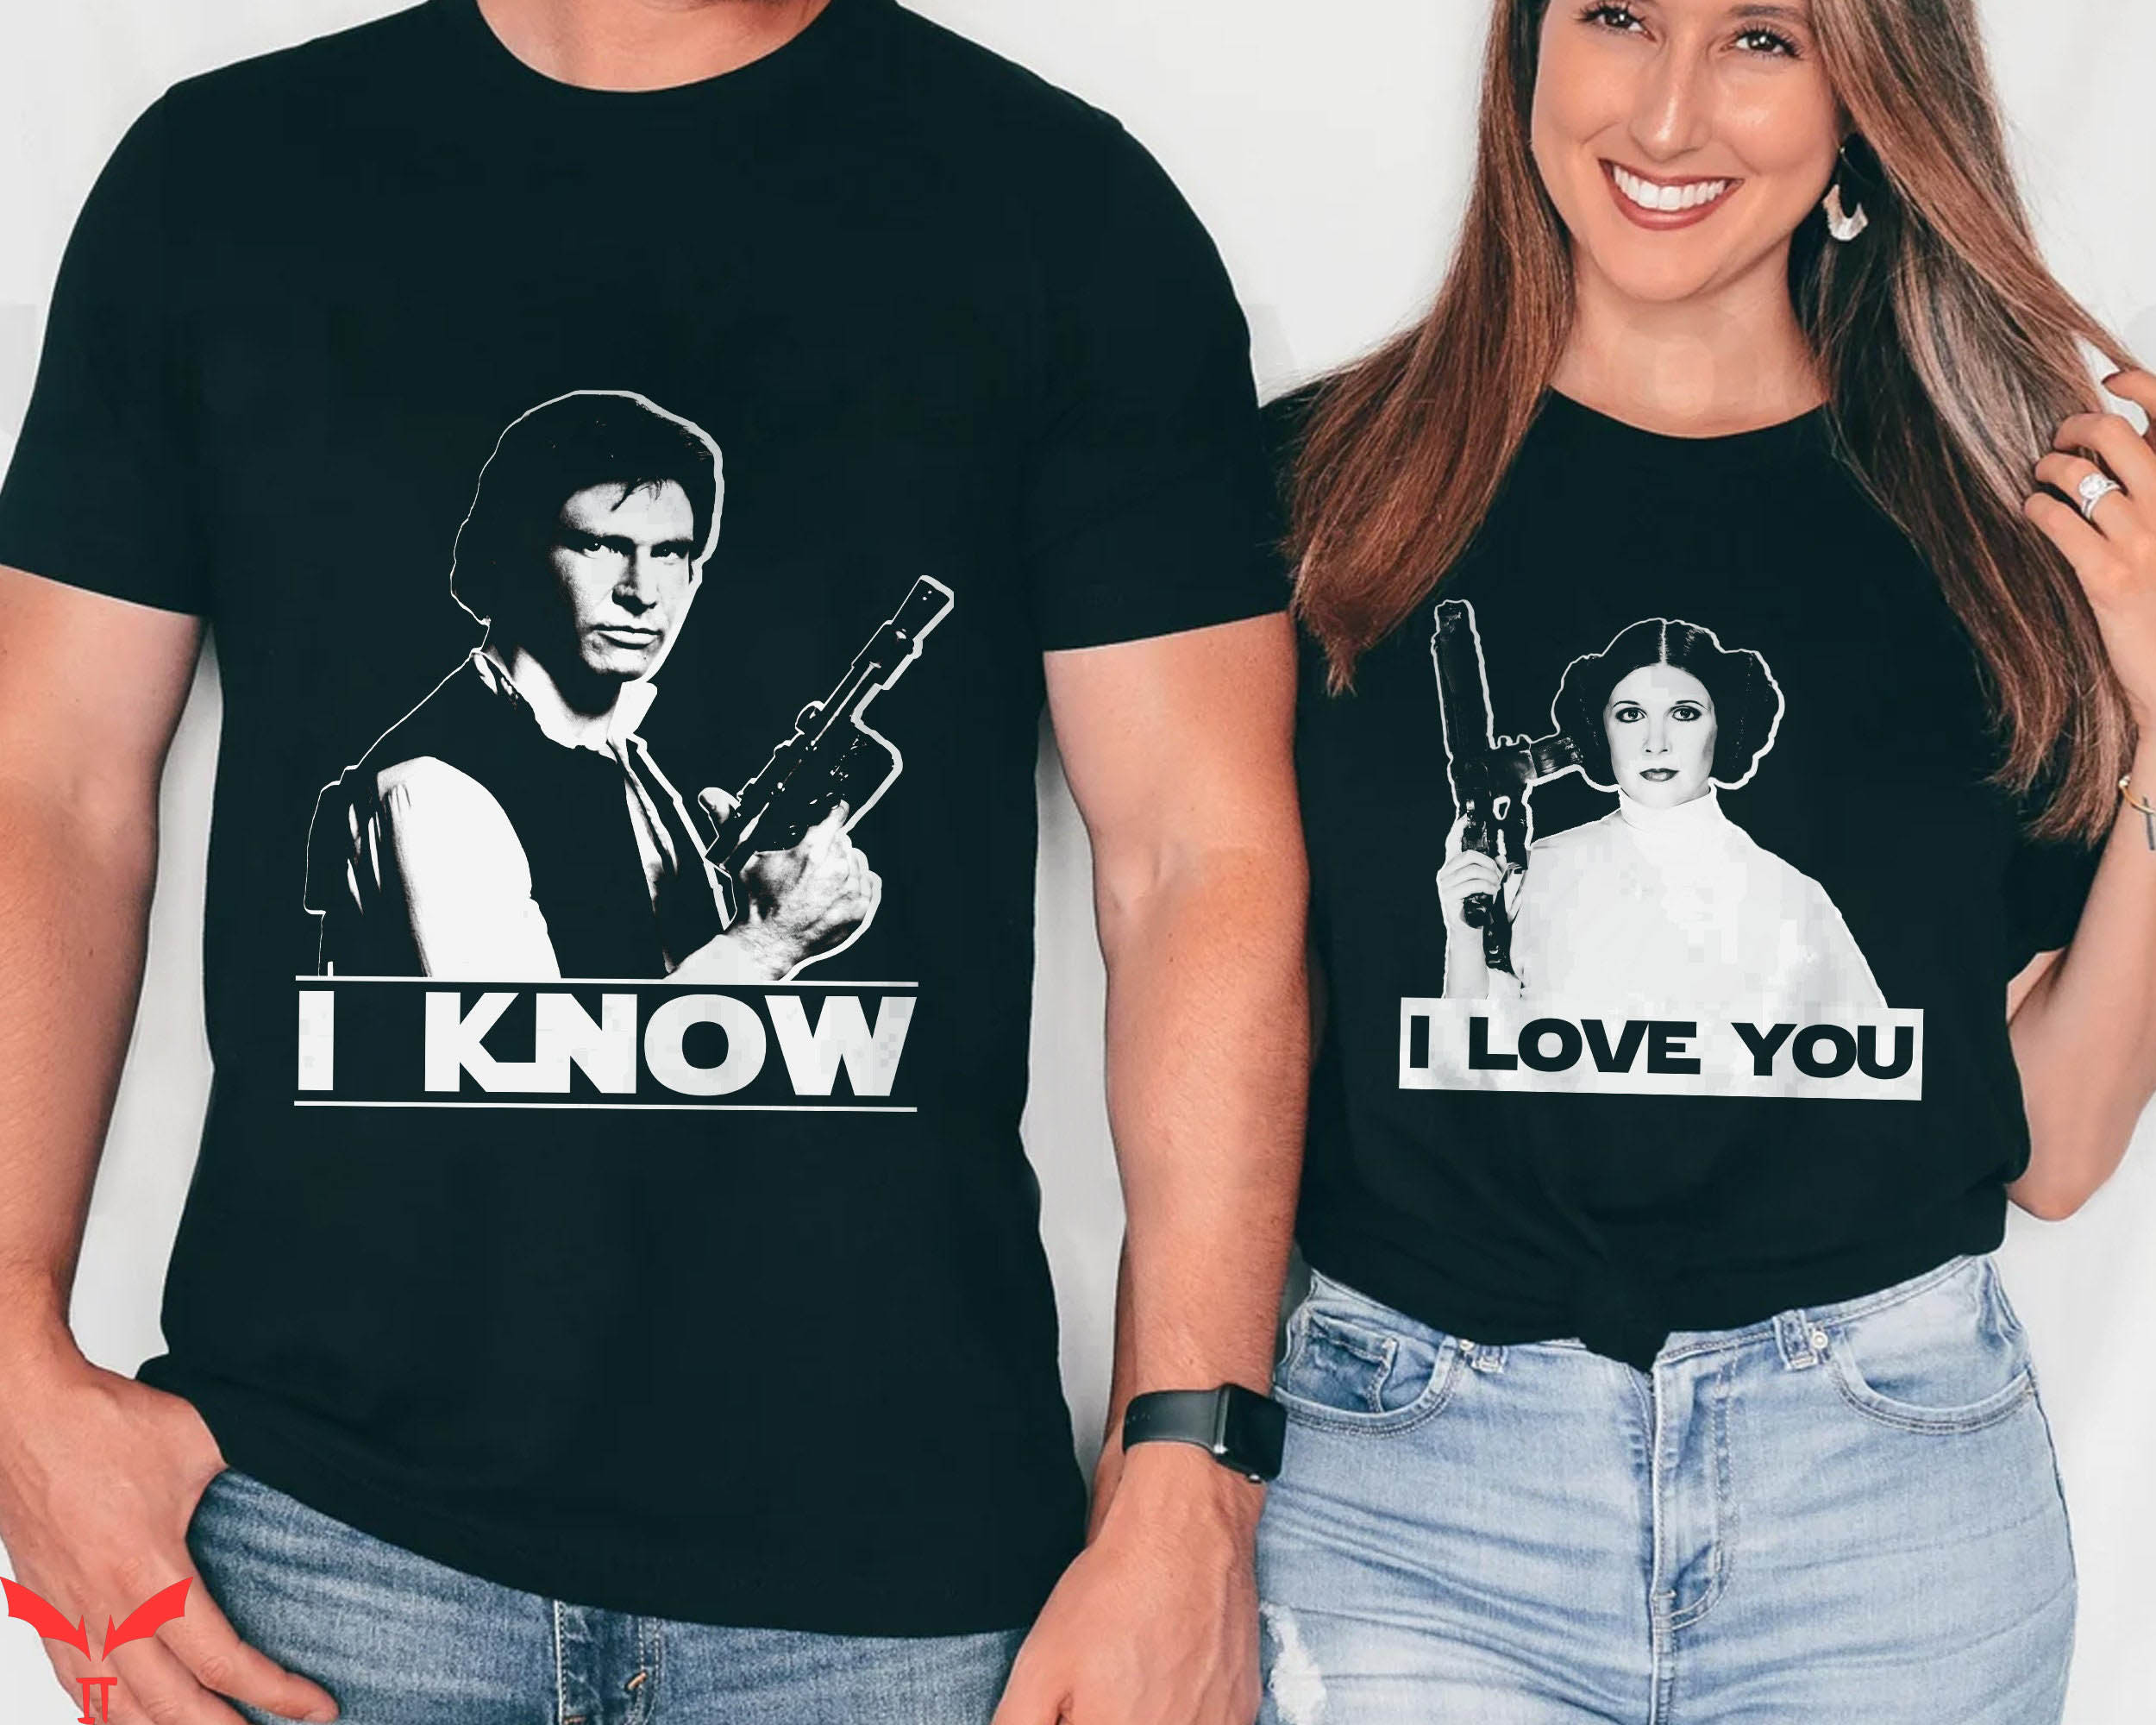 Star Wars Matching T-Shirt I Love You I Know Disney Couples